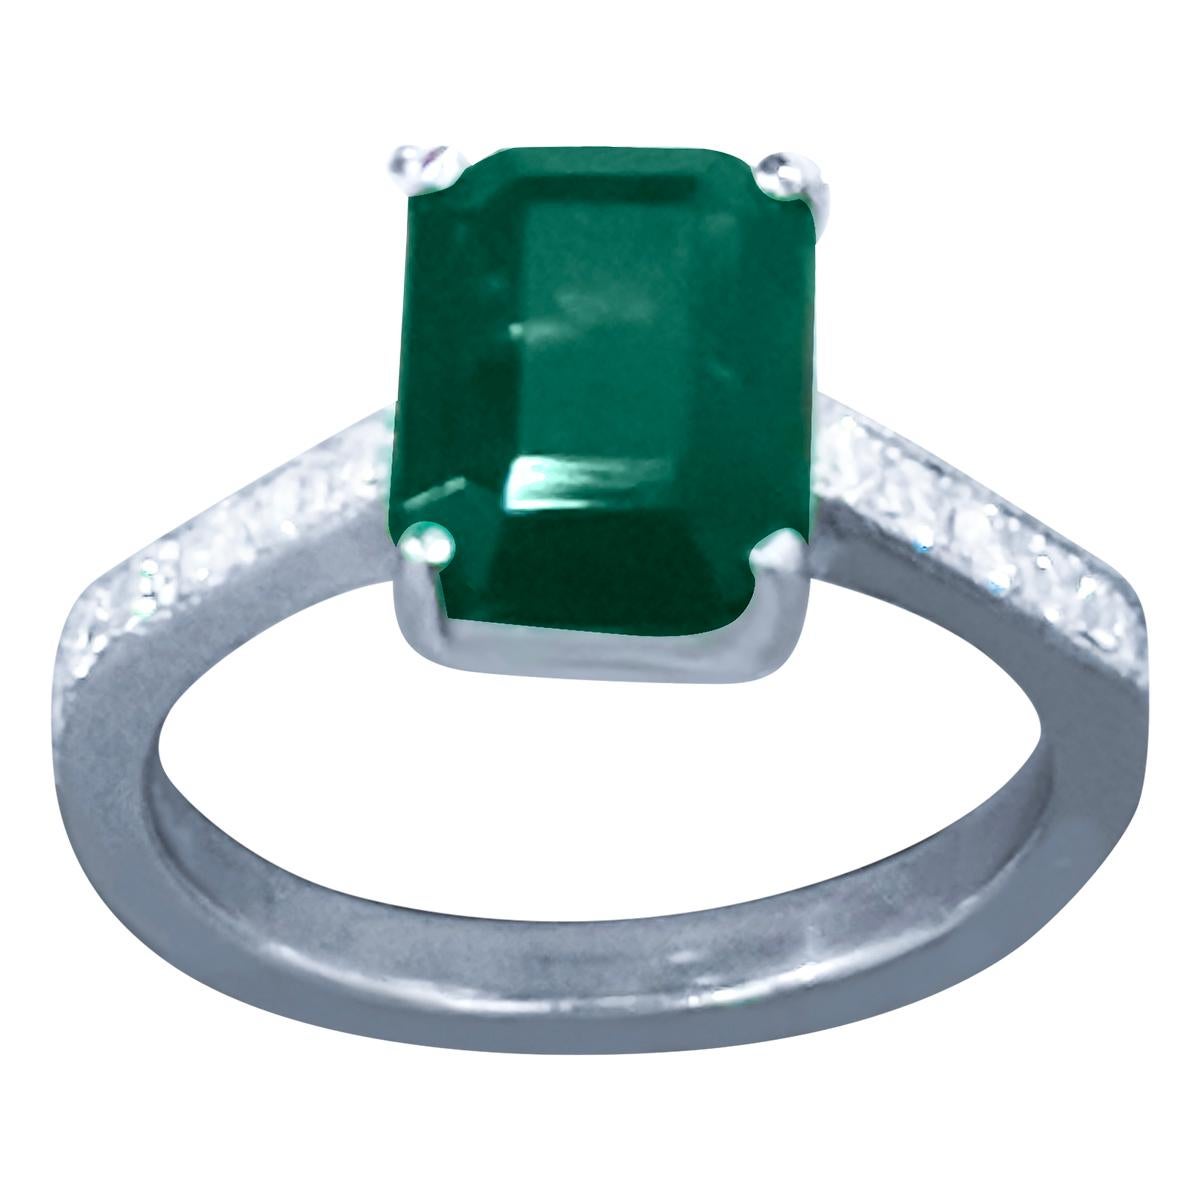 
Approximately 2 Carat Natural  Emerald Cut Emerald & Diamond Ring in Platinum , Estate Size 5.2
A classic design  ring 
Approximately 2 Carat  Emerald Cut Emerald Absolutely gorgeous emerald , Very desirable color 
 Platinum  5 gm with stone
